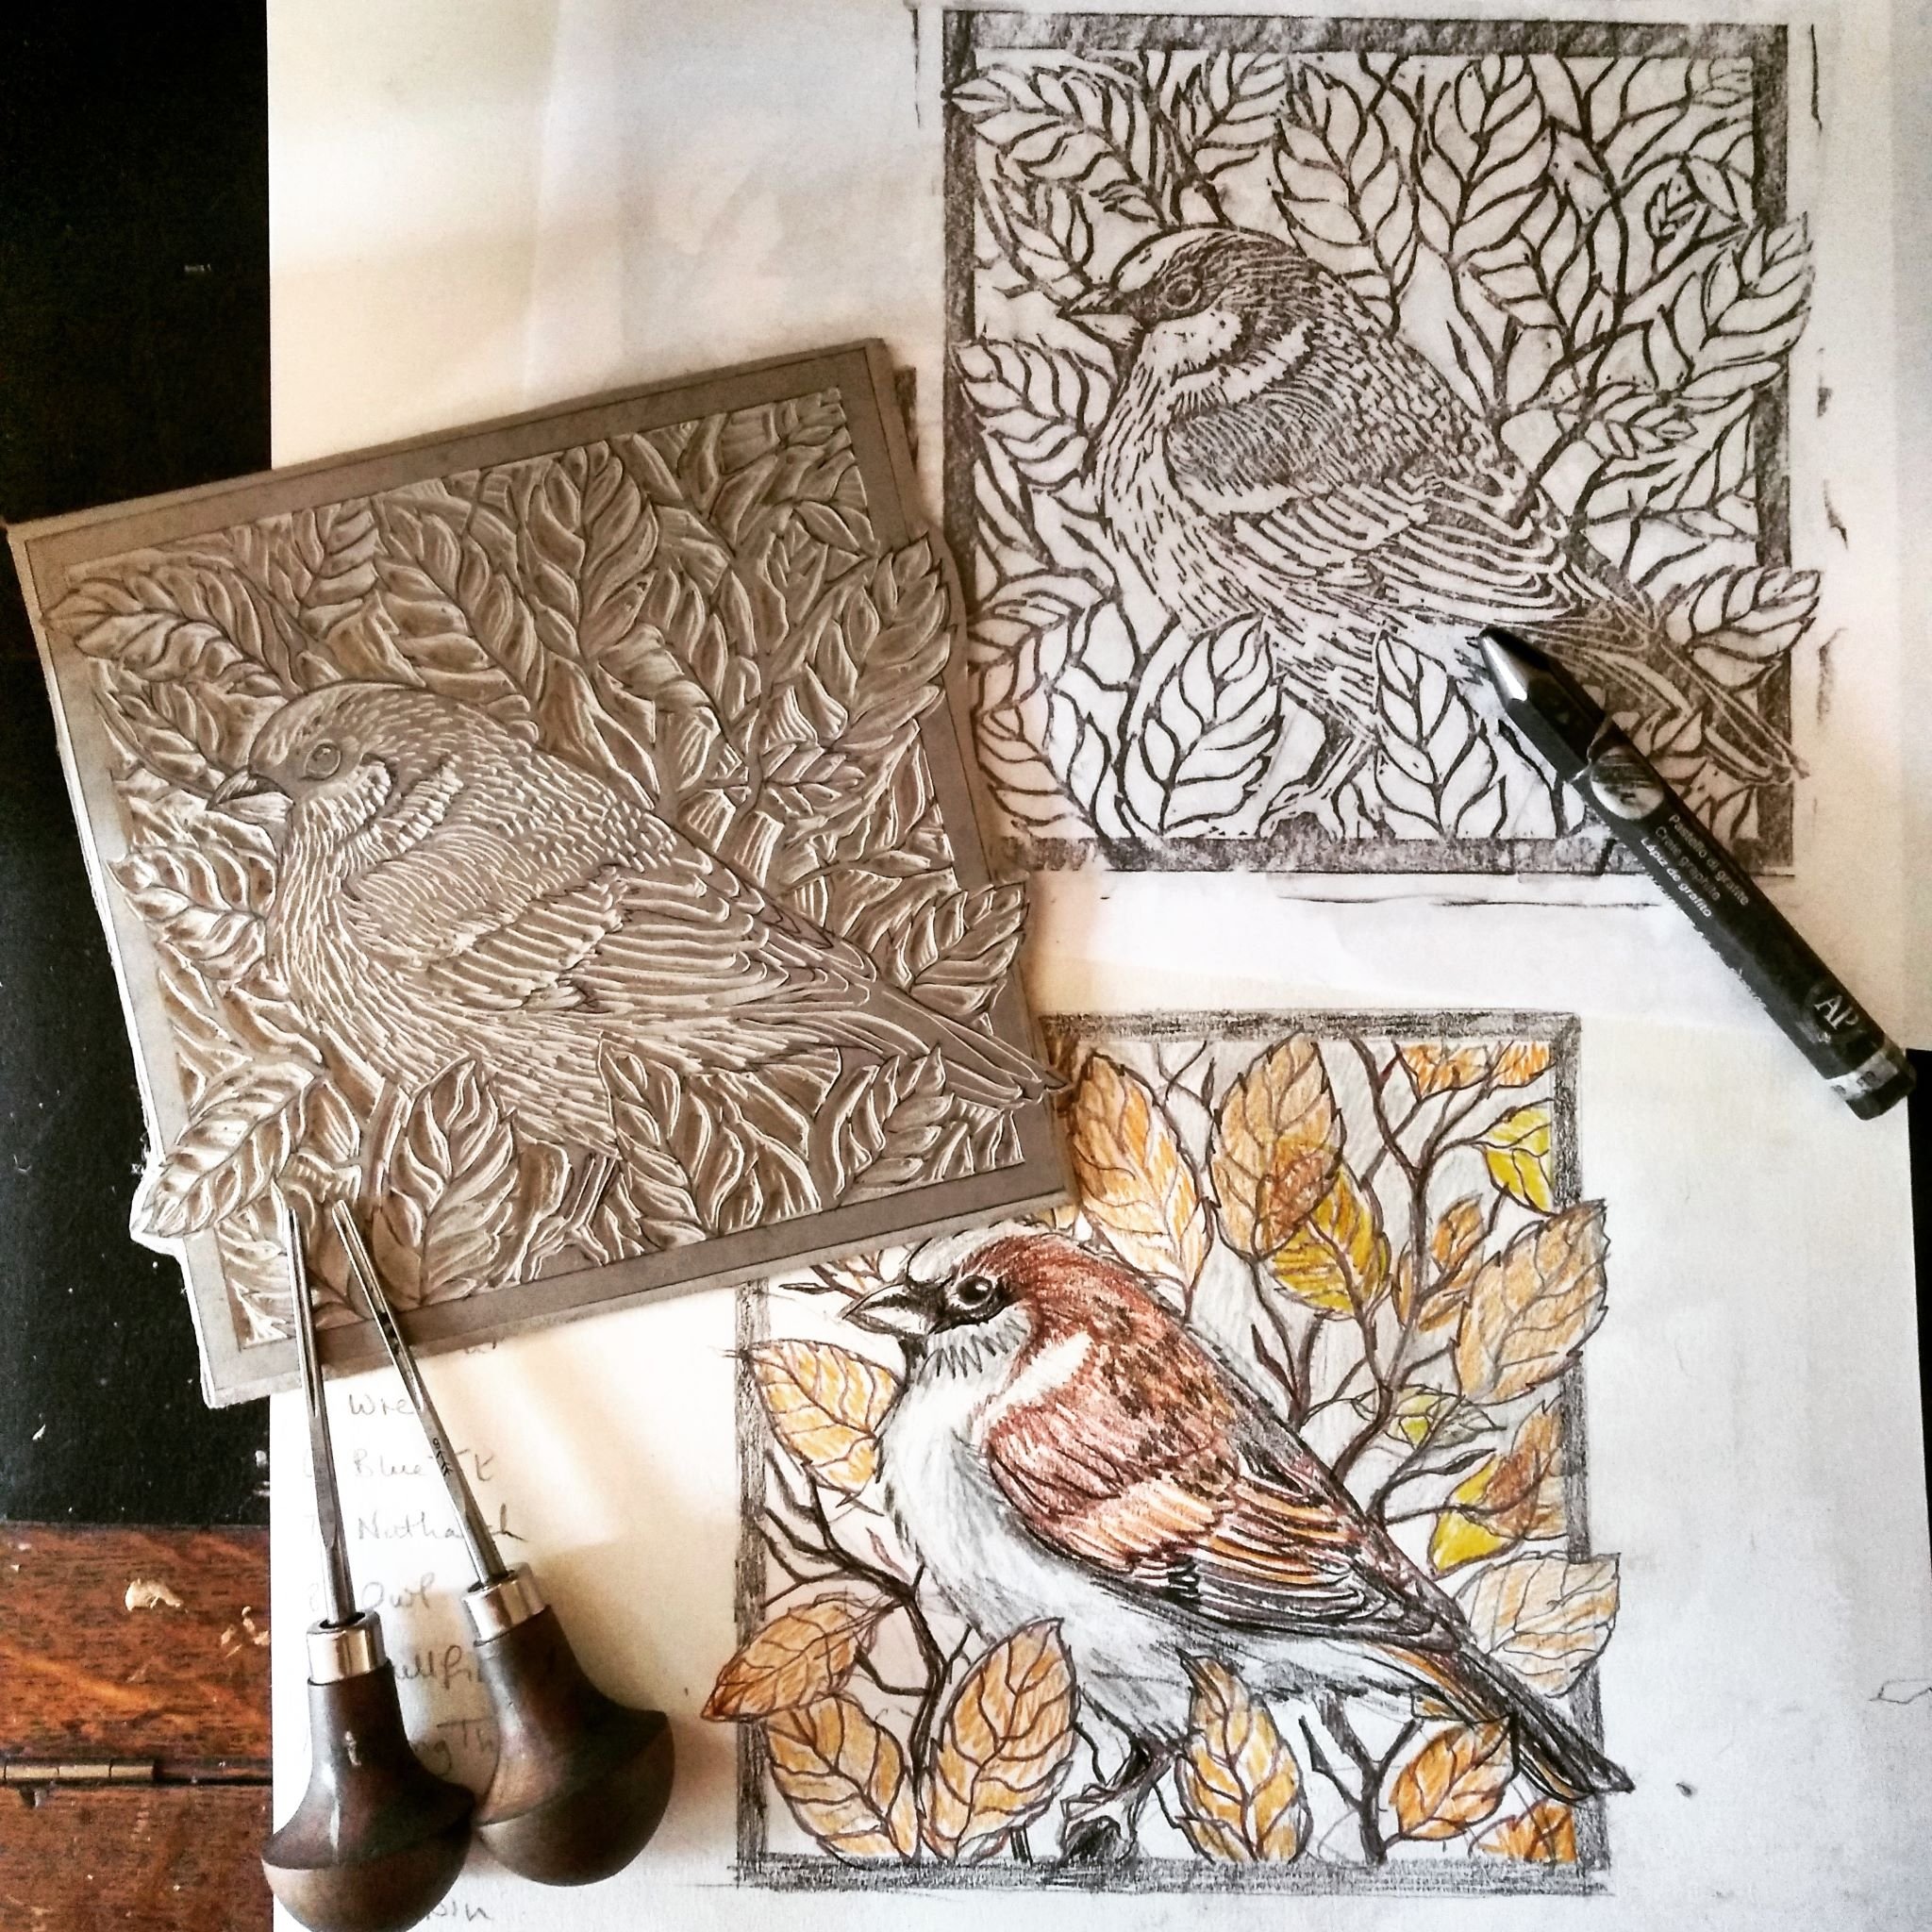 Sparrow print process with carving tools